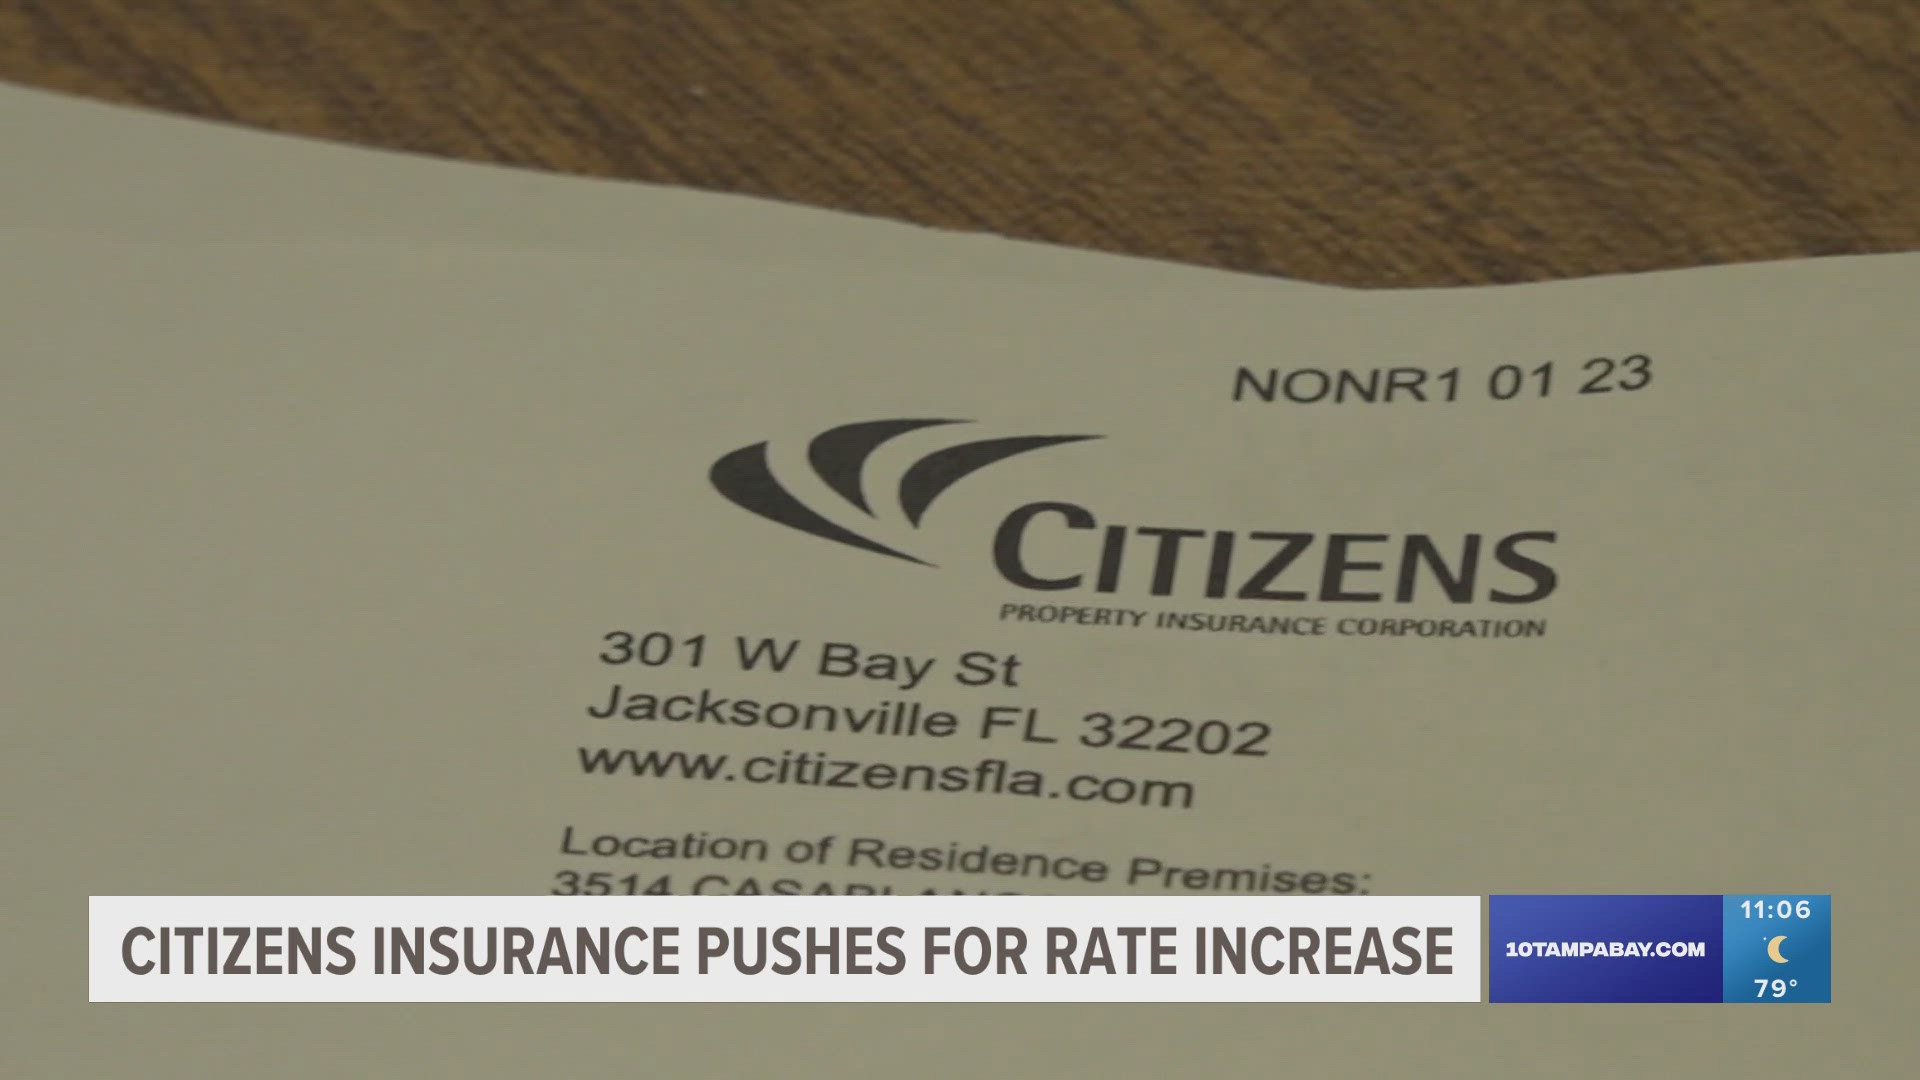 Rate hikes would have far-reaching effects, as Citizens is the largest insurer in the state, with about 1.2 million policies.